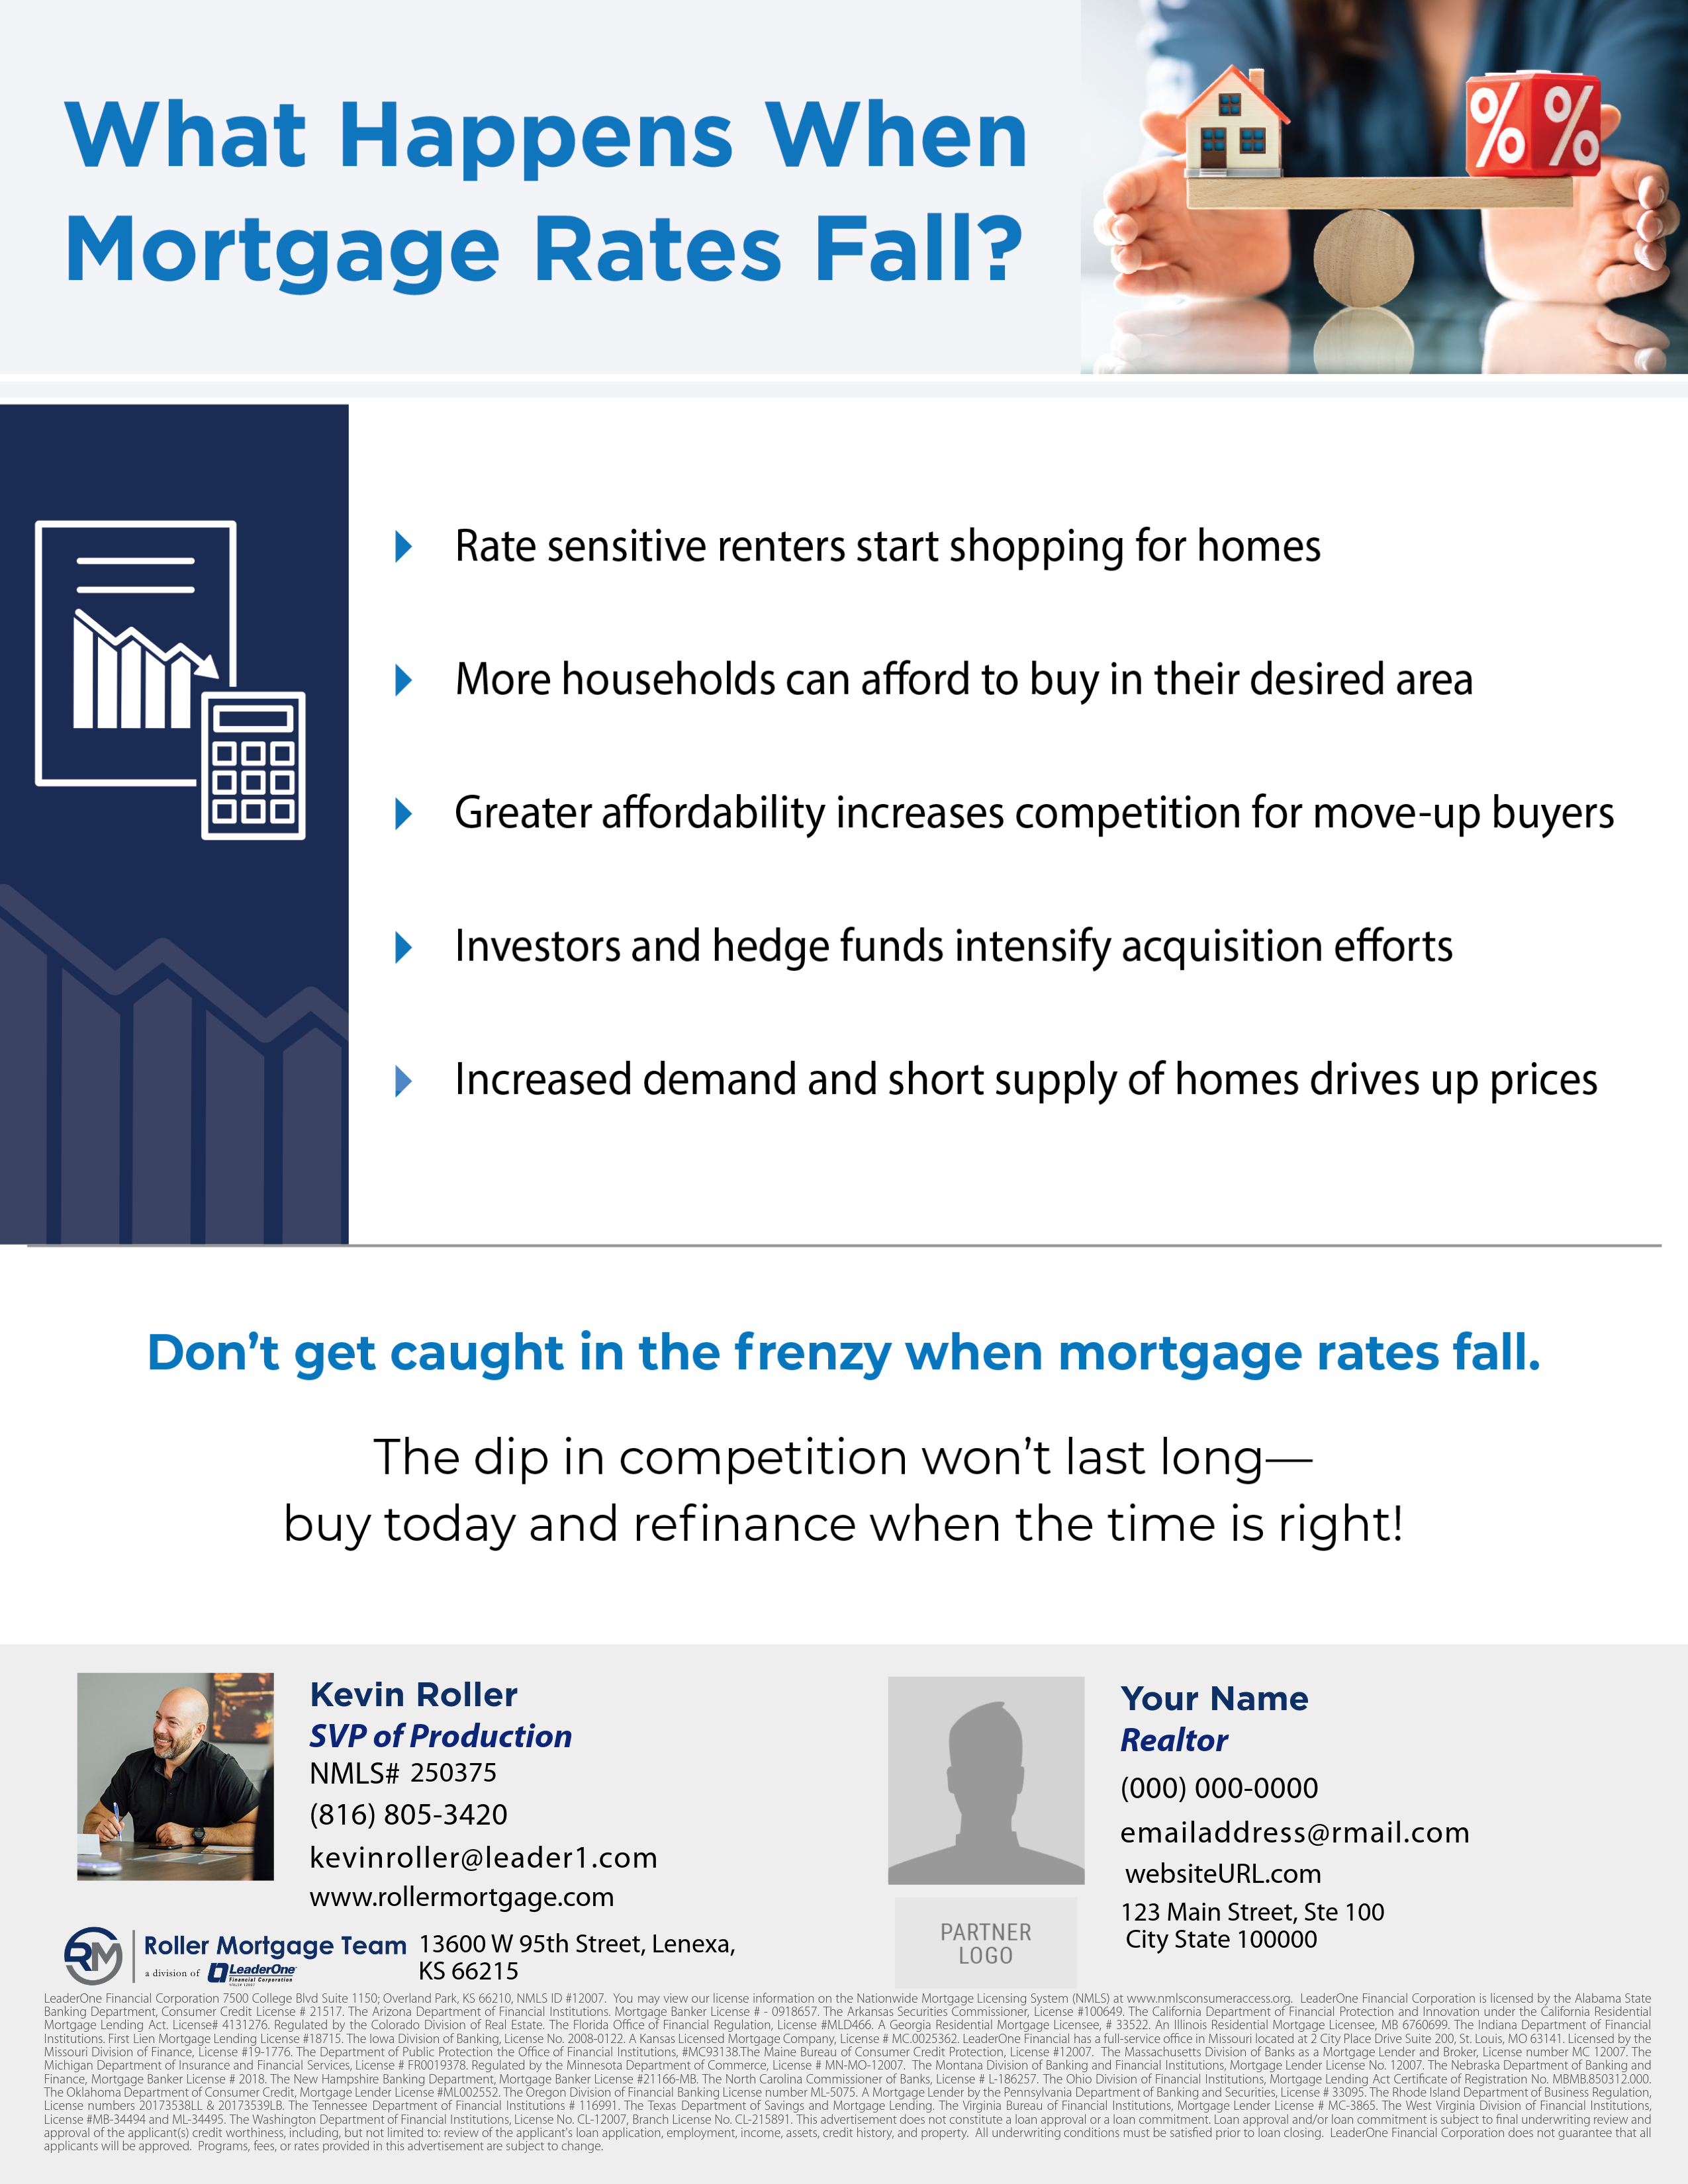 When Mortgage Rates Fall